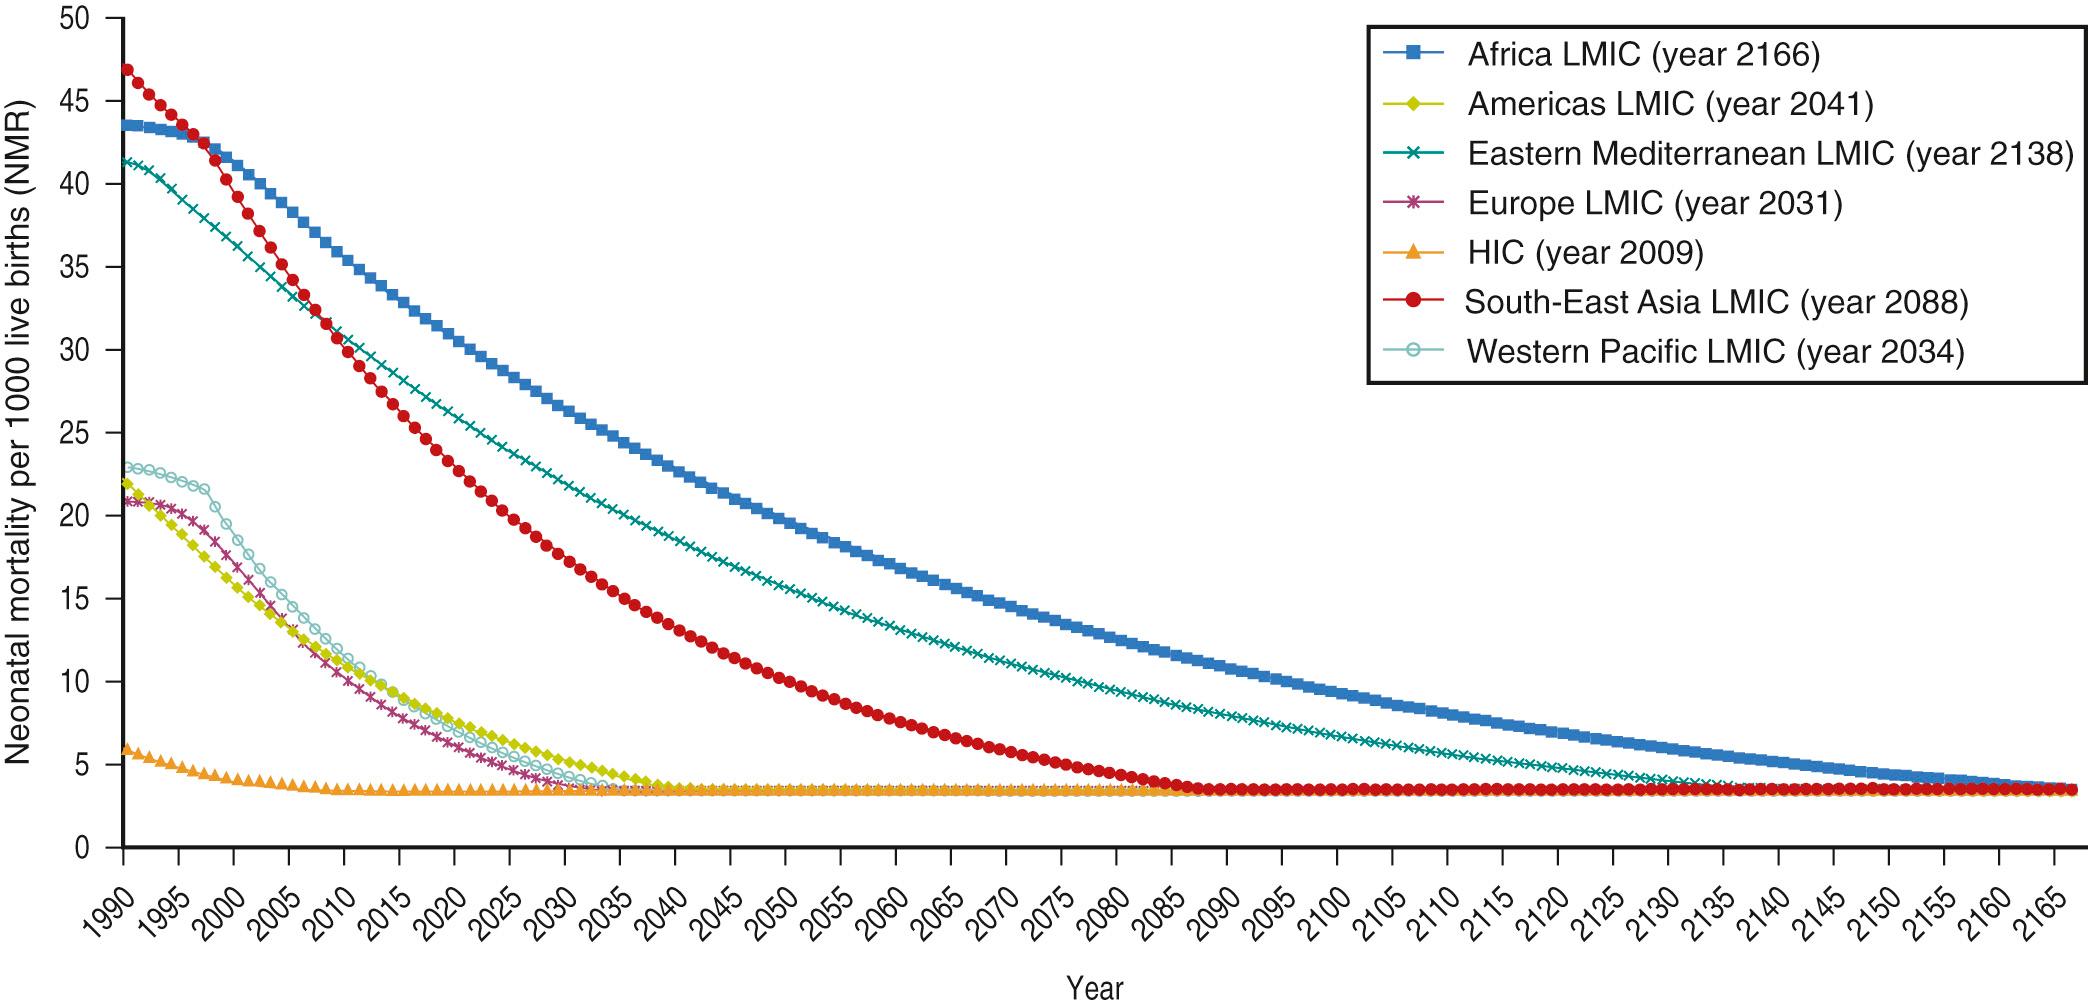 Fig. 8.7, Forecasting the number of years for low- and middle-income regions to reduce neonatal mortality rate (NMR) to the current rate in HICs. The graph illustrates when each region of the world attains an NMR of 3.6 as observed in HICs in 2009—the year each region attains an NMR of 3.6 is specified in parenthesis. Regional NMRs are illustrated as constant from the year they achieve an NMR of 3.6. Forecasting based on average annual changes in the NMR over the 10-year period 1999–2009.